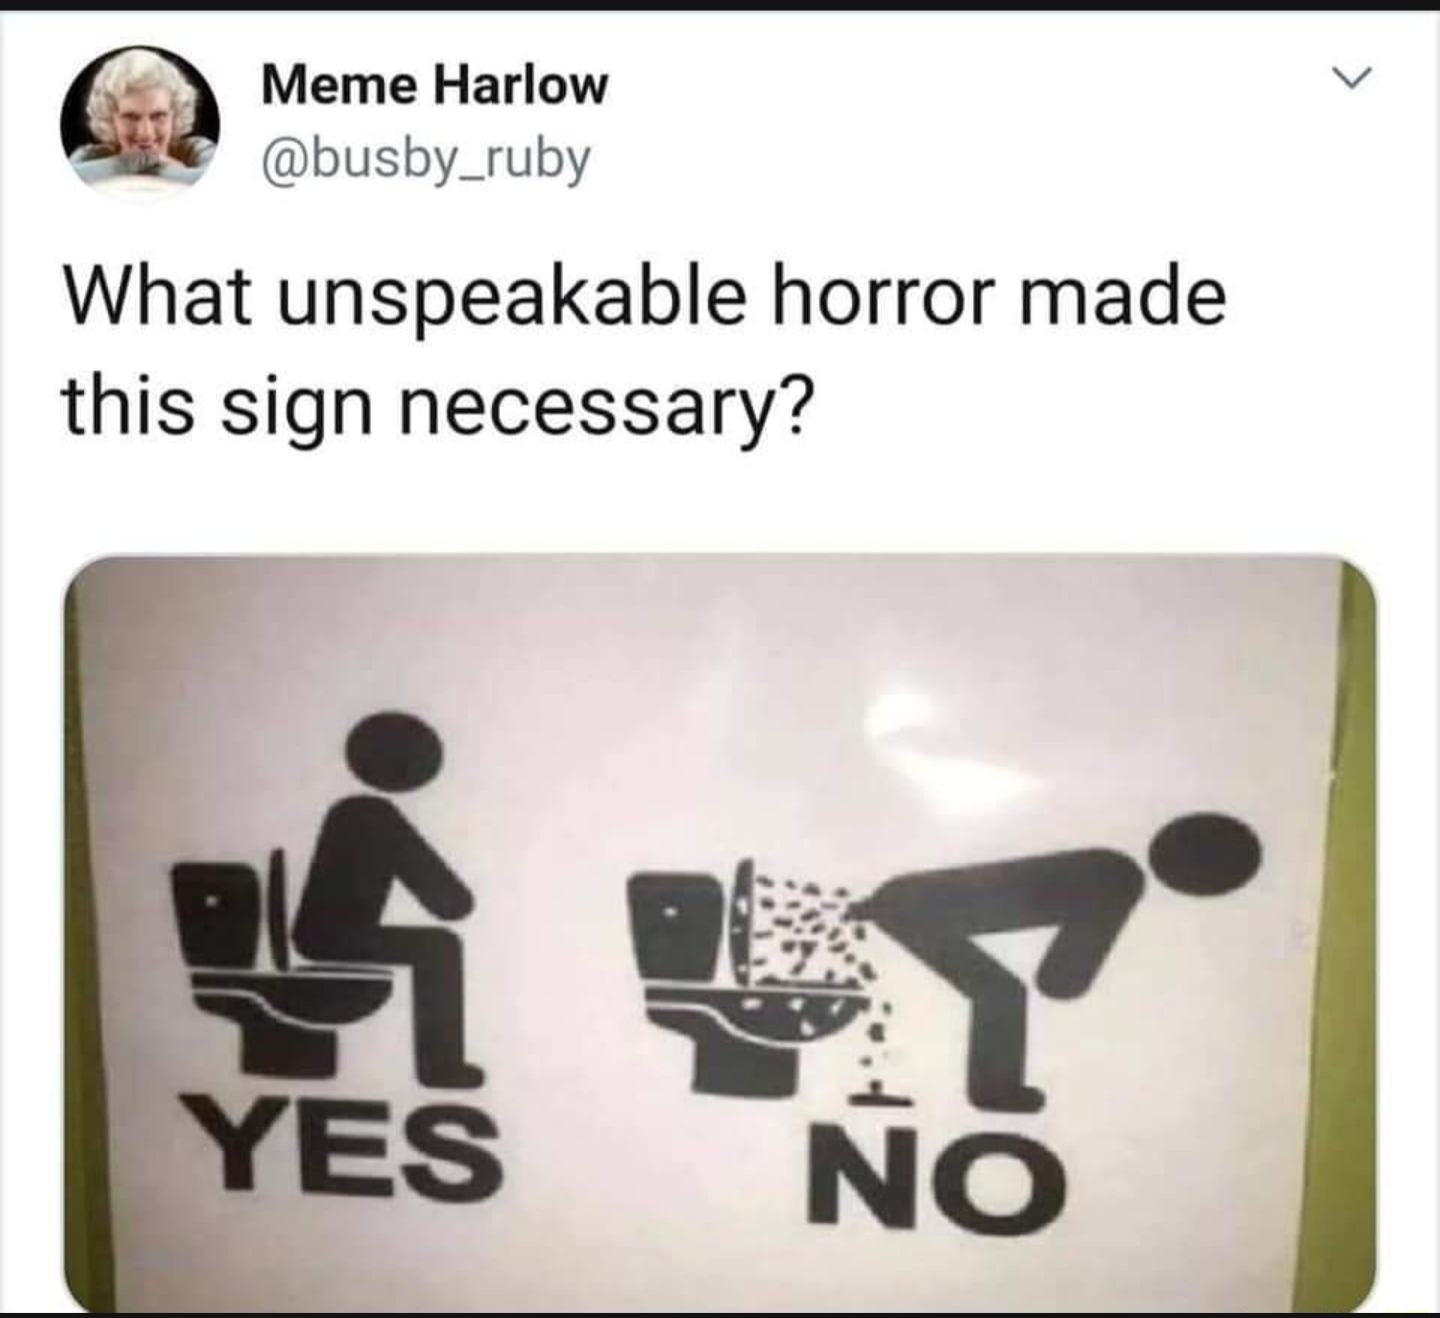 missing piece meets the big - Meme Harlow What unspeakable horror made this sign necessary?